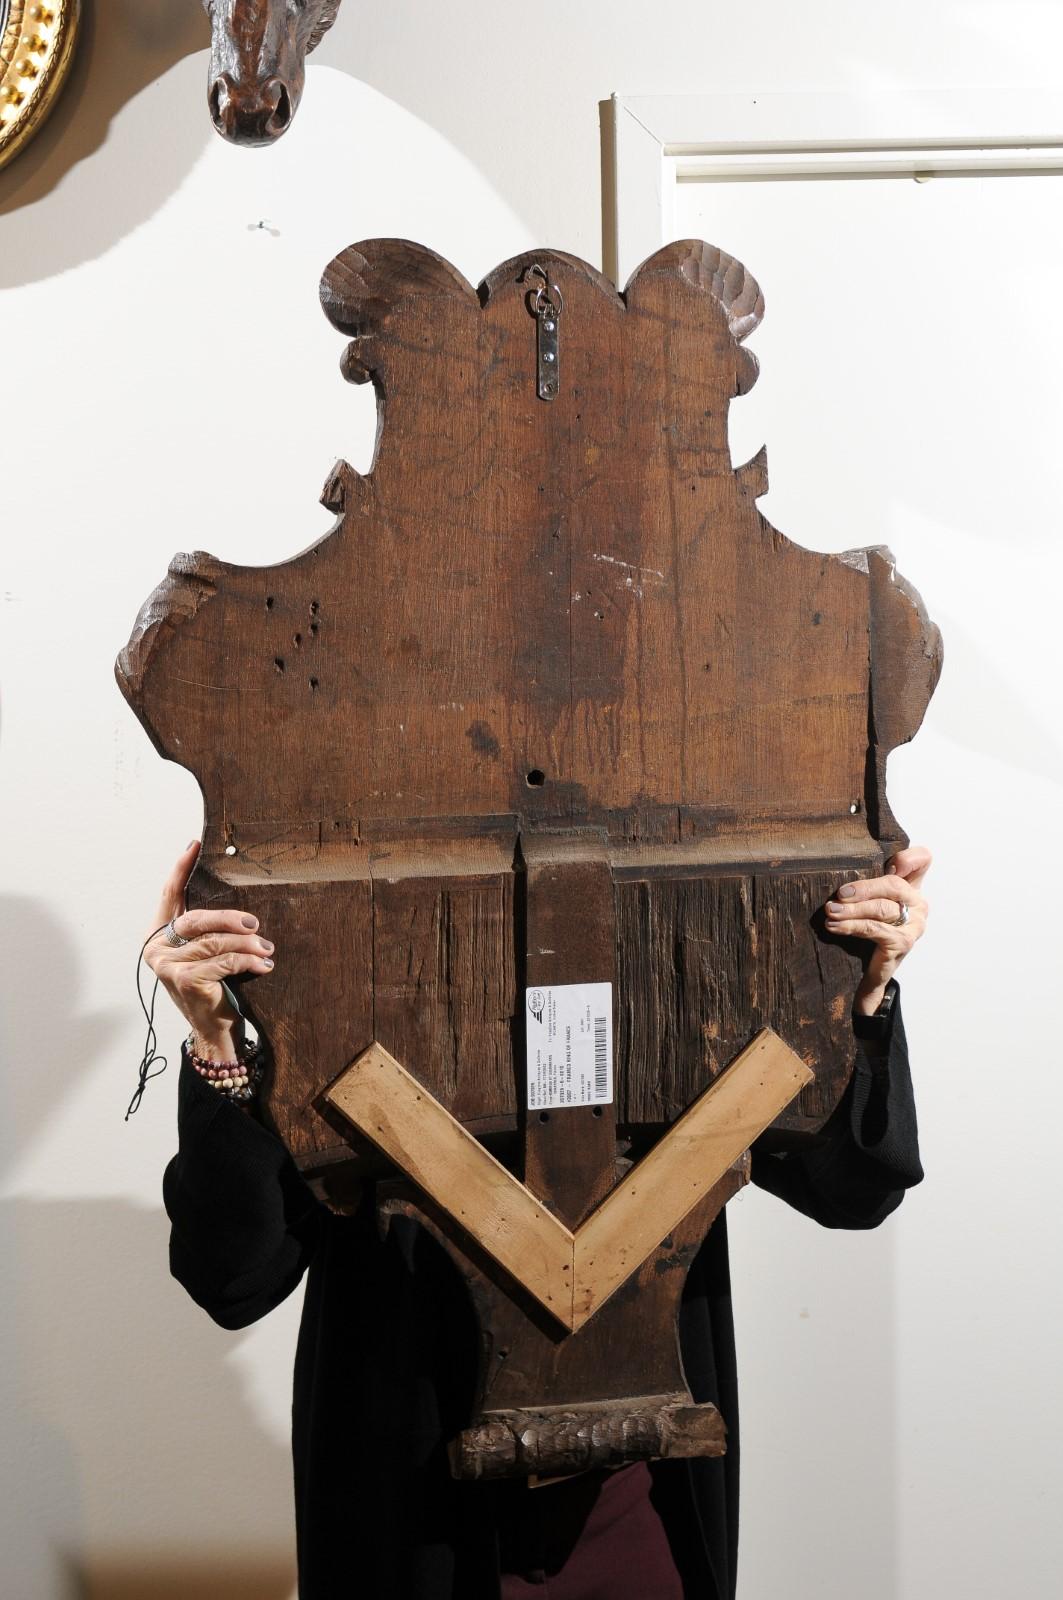 A French 19th century hand-carved wooden cartouche depicting the House of Rothschild coat of arms representing an embowed arm grasping five arrows. This large decorative wall panel features the coat of arms of the Rothschild family, who established